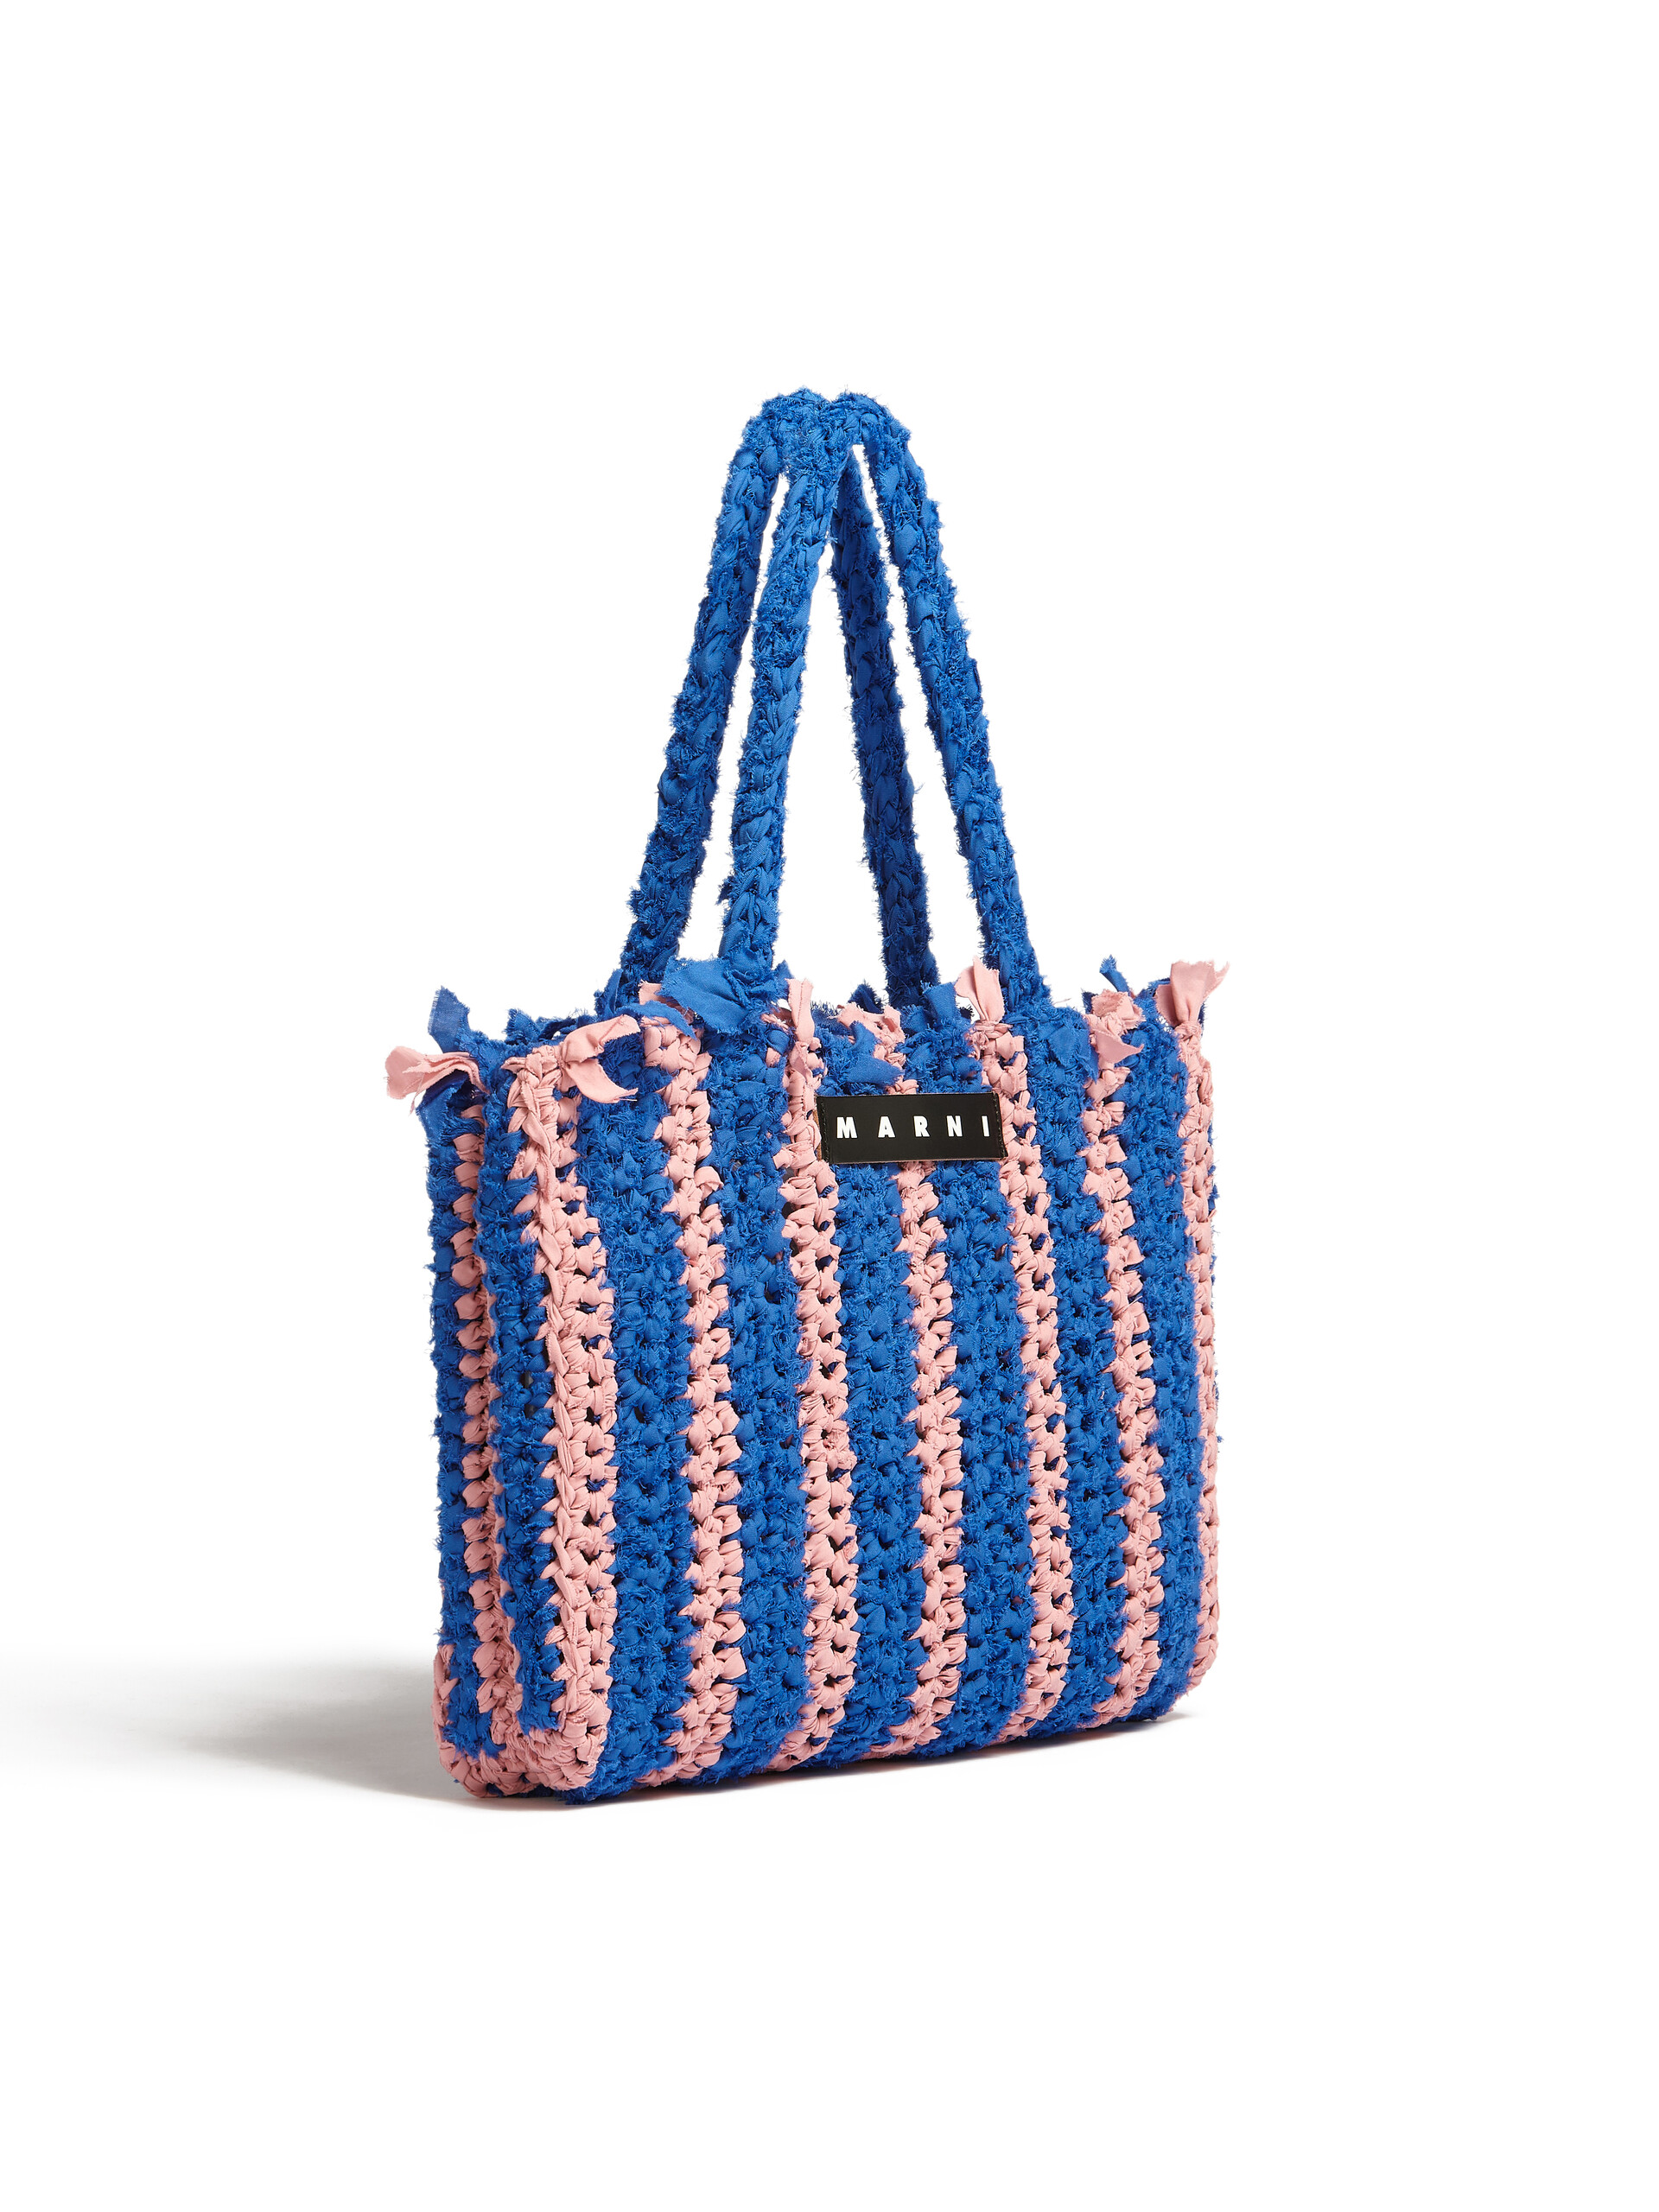 MARNI MARKET bag in pink and blue cotton - Bags - Image 2